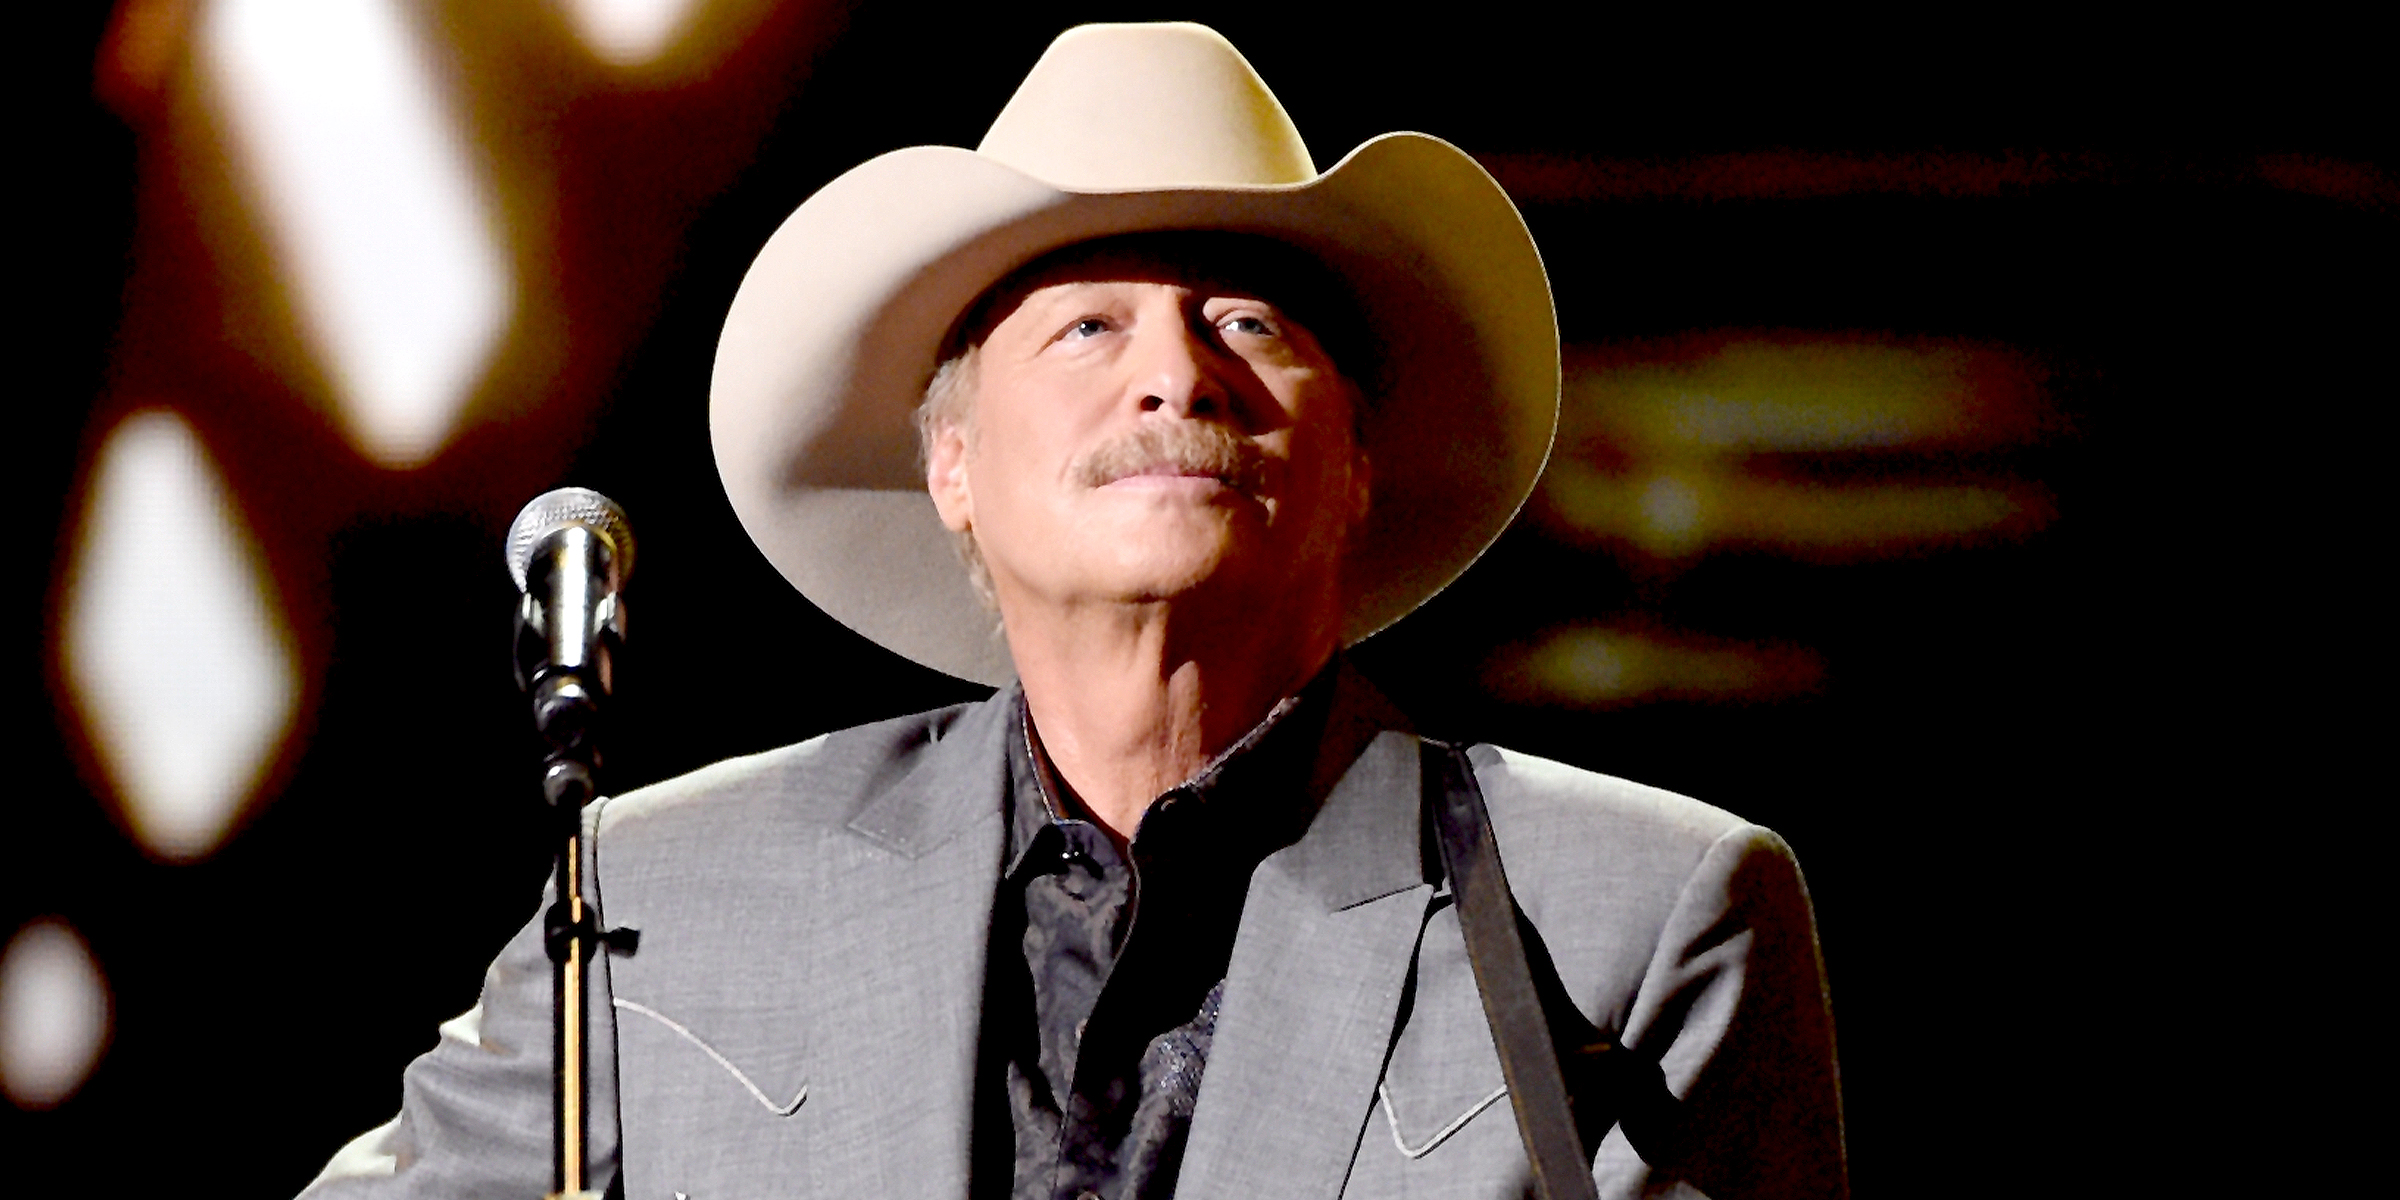 Alan Jackson | Source: Getty Images